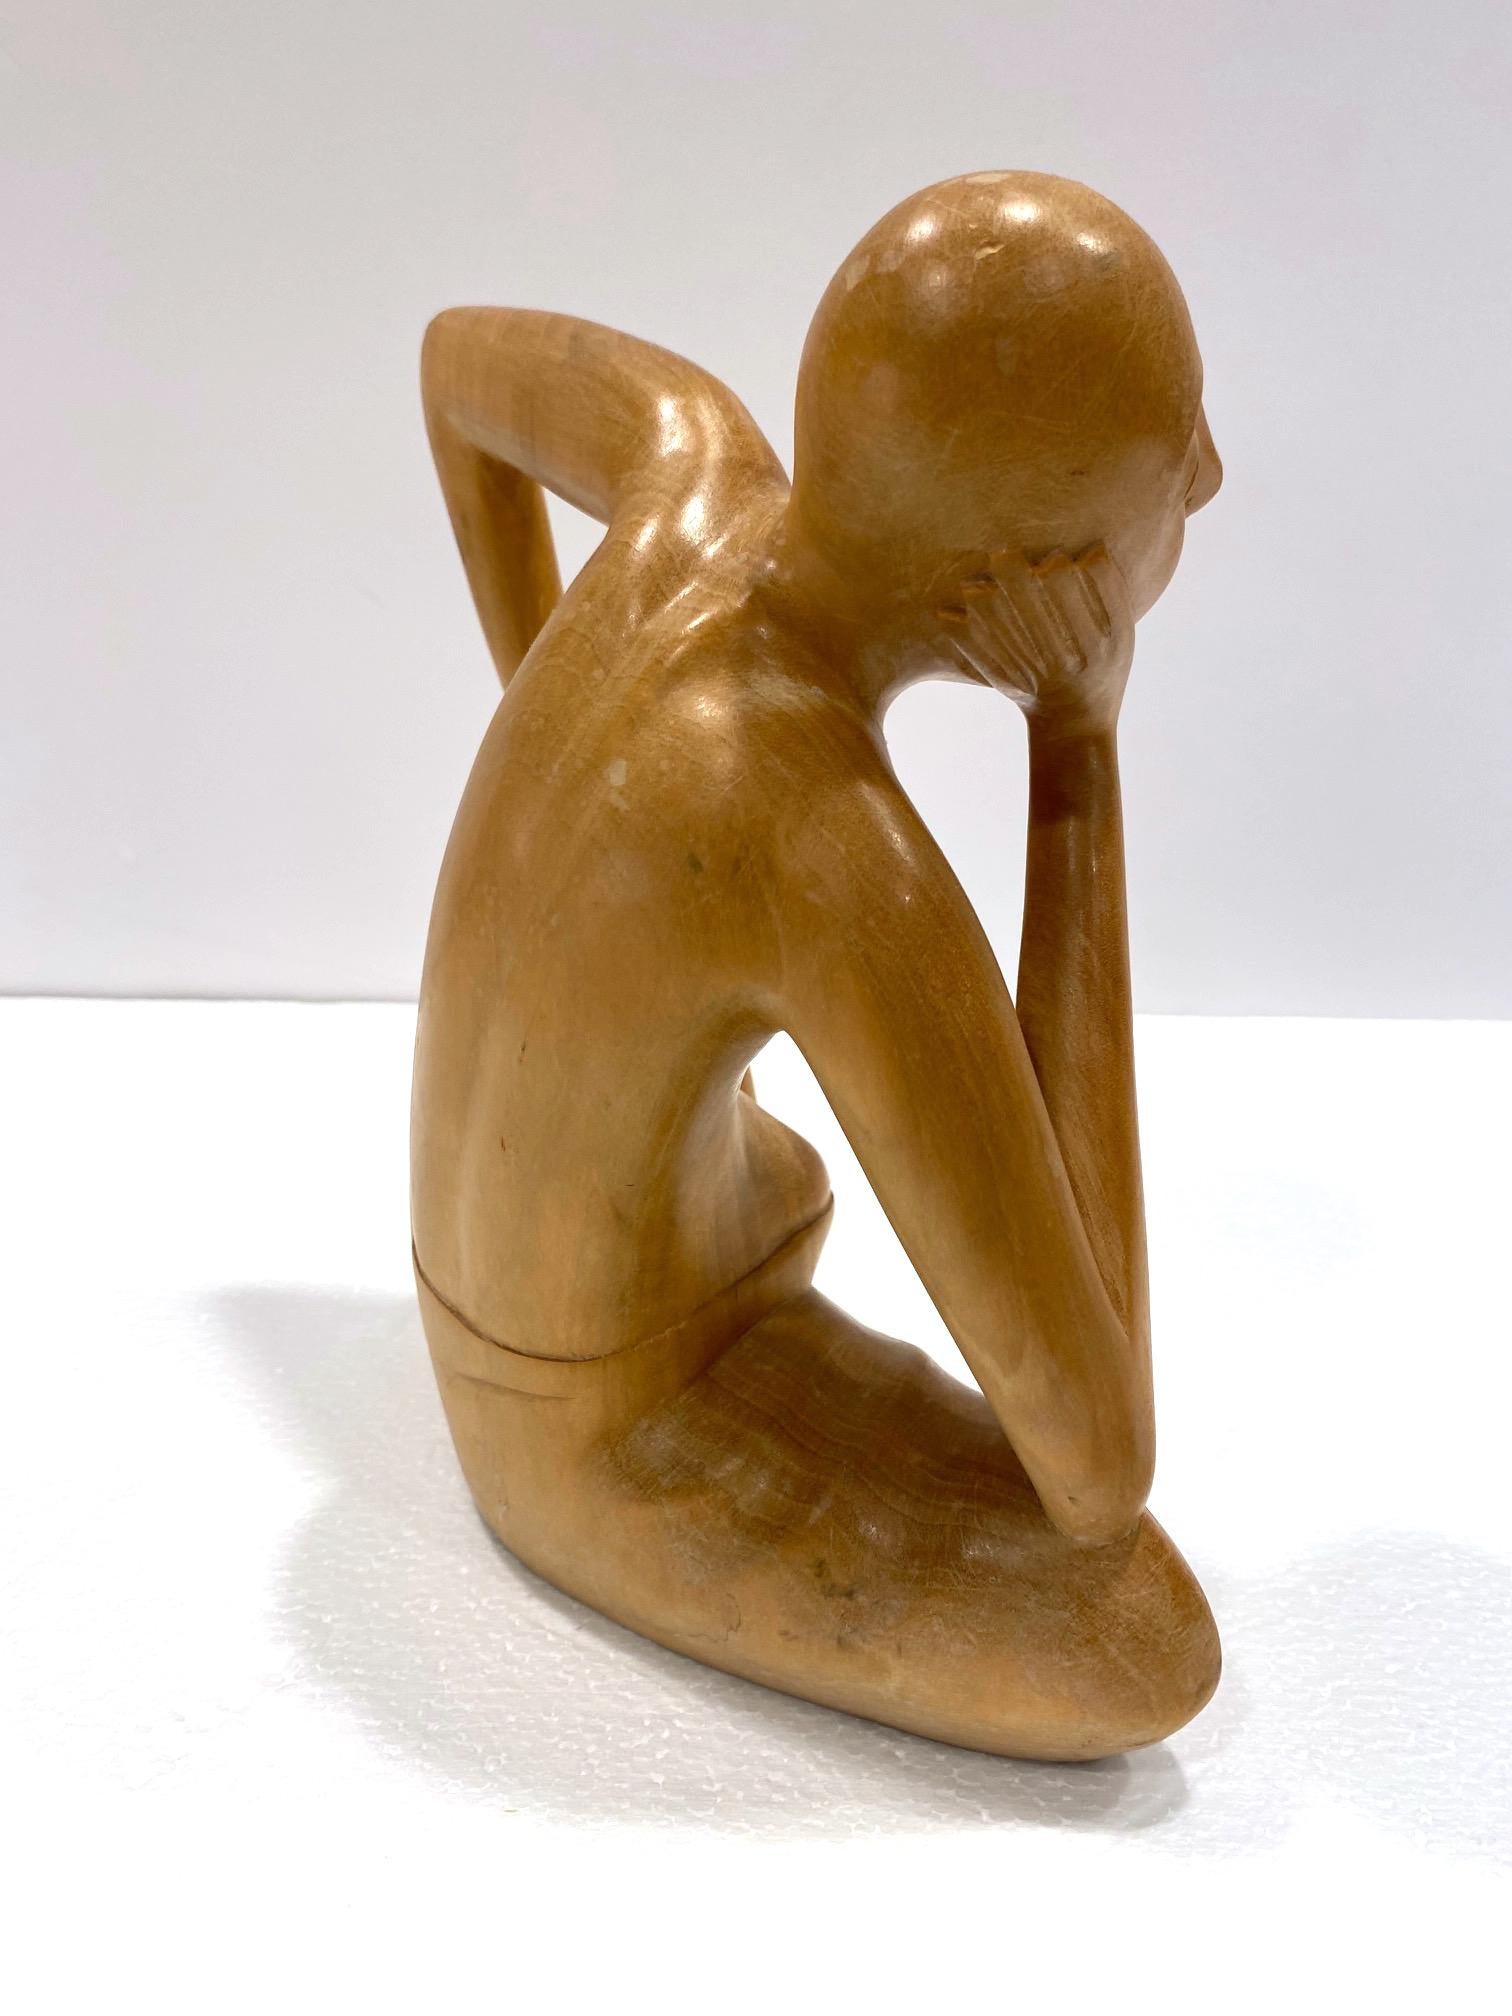 The Thinker, Vintage Balinese Figural Sculpture in Solid Wood, c. 1970's 3